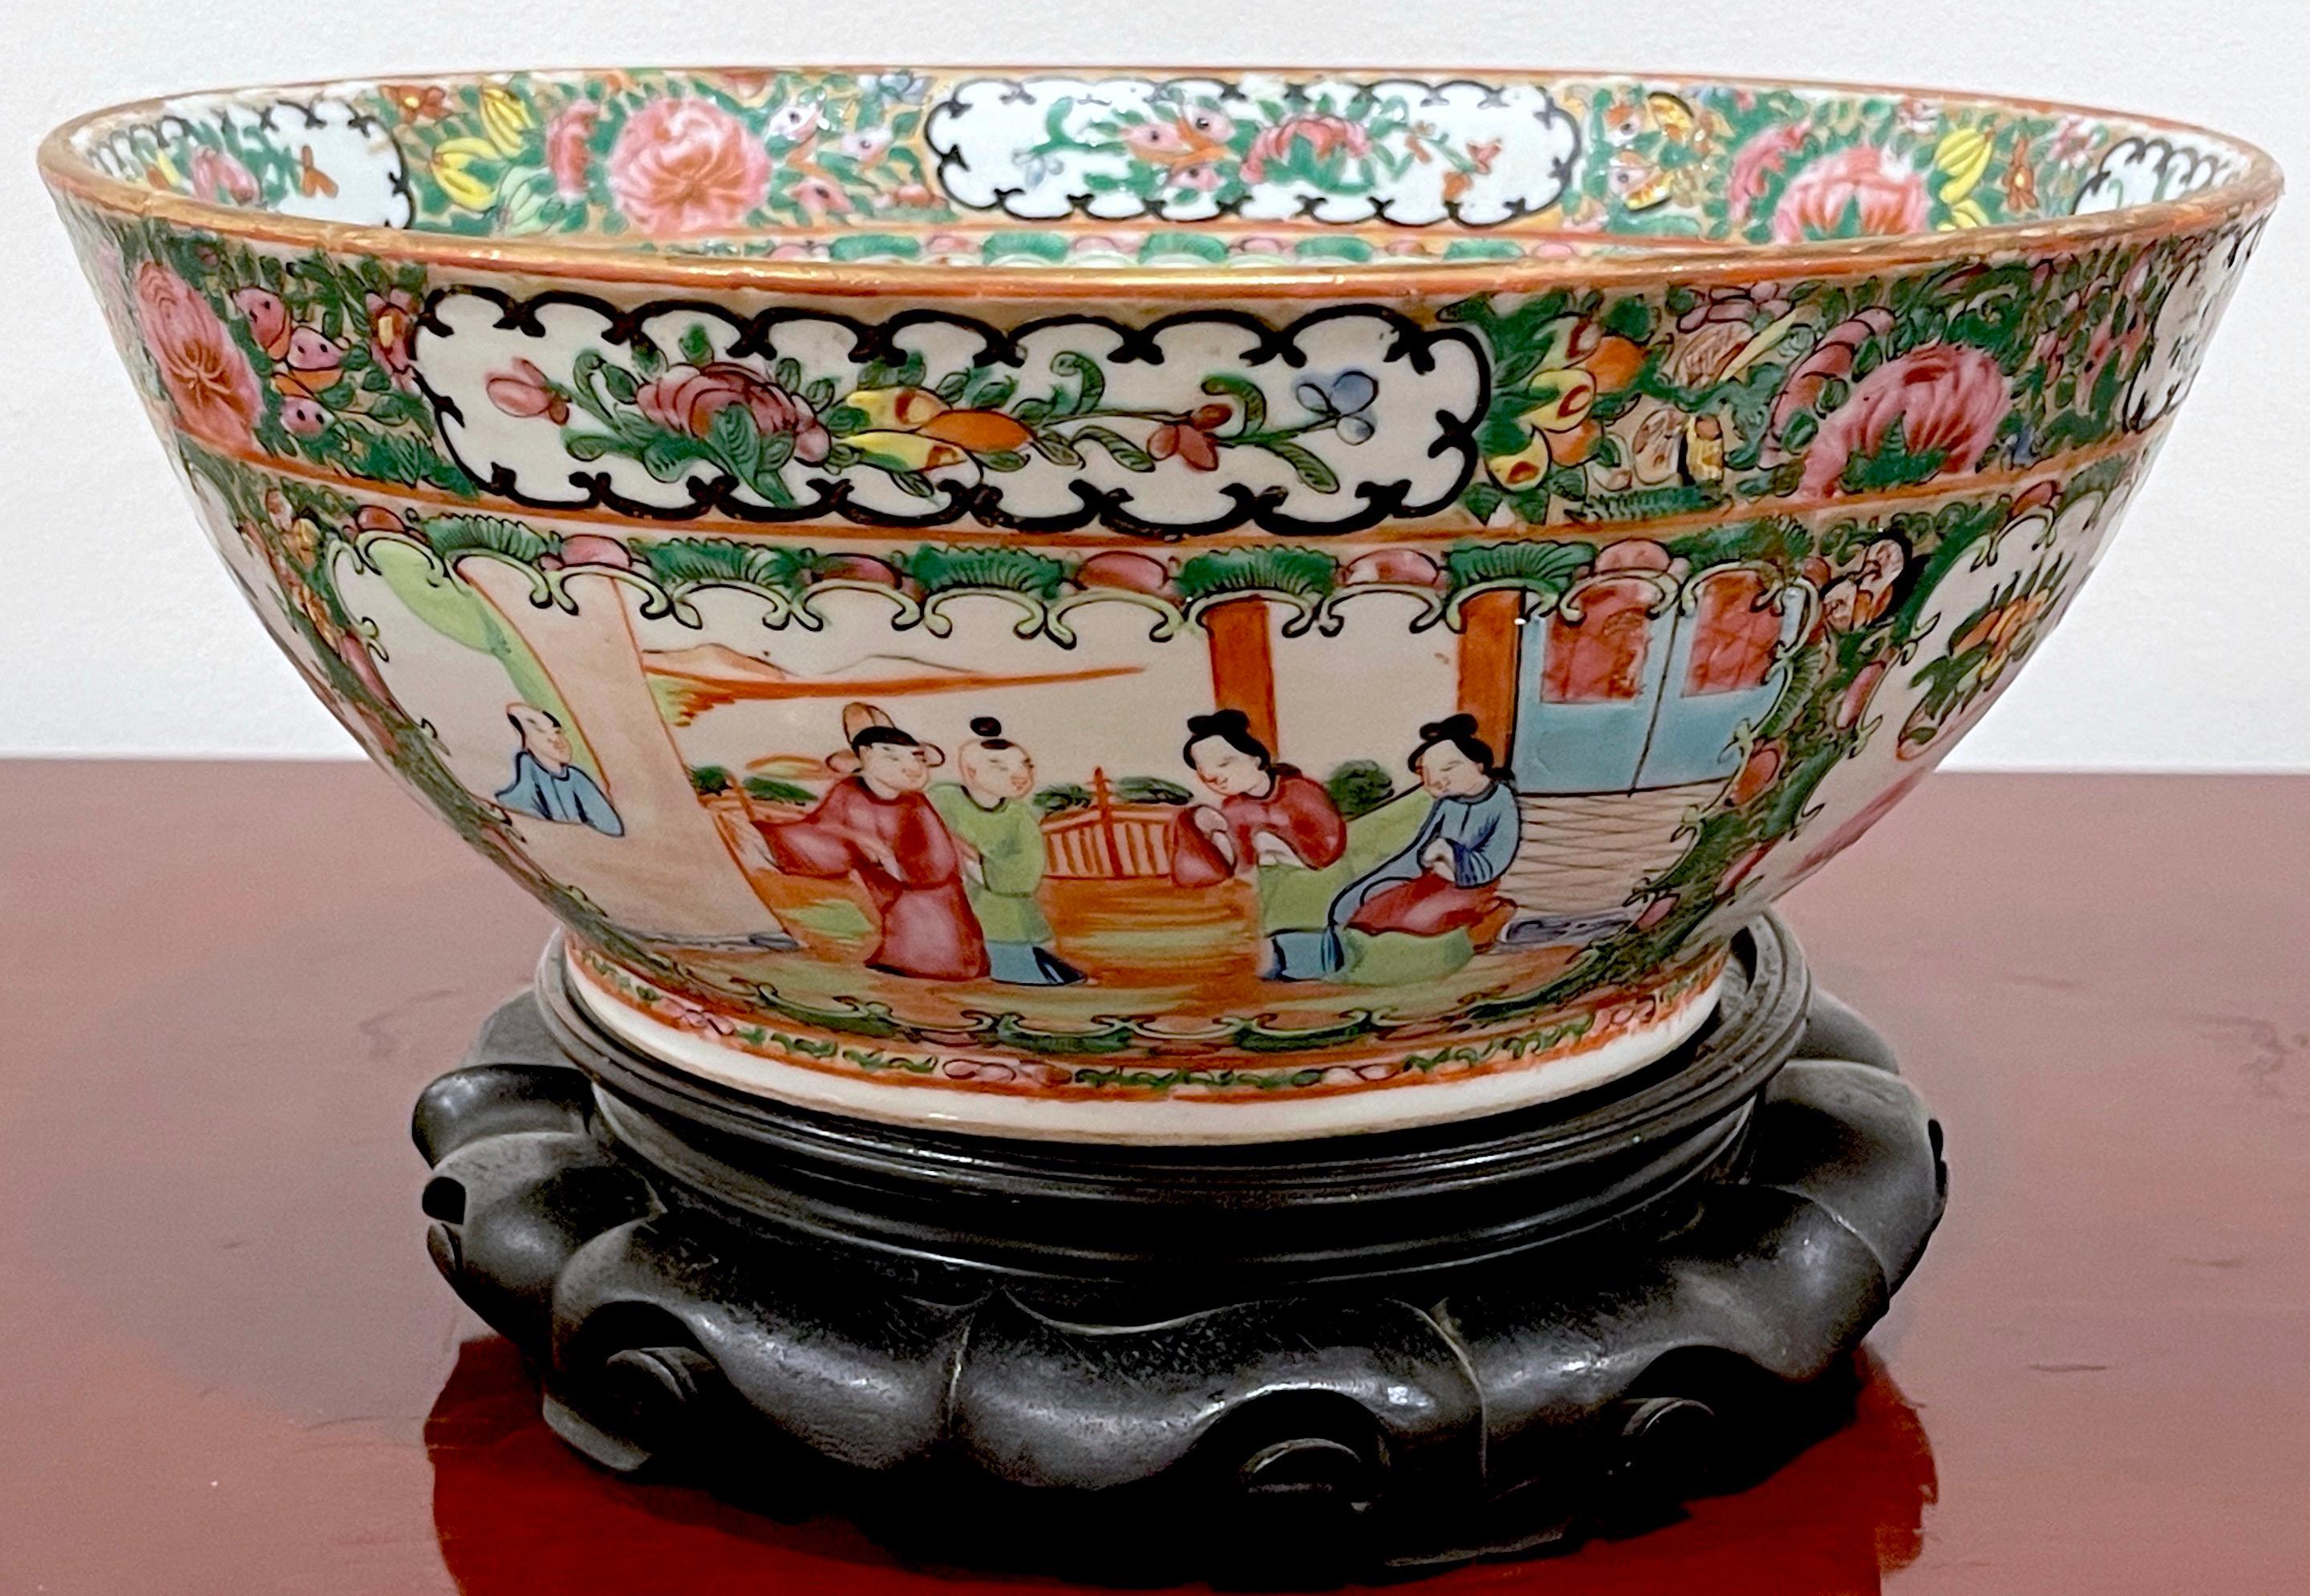 19th Century Chinese Export Rose Medallion Bowl & Hardwood Stand
China, circa 1880s, Later carved hardwood stand 20th Century 
Of  good size, bright and colorful, hand painted and enameled  in the typical palette with gilt decoration. 
Complete with